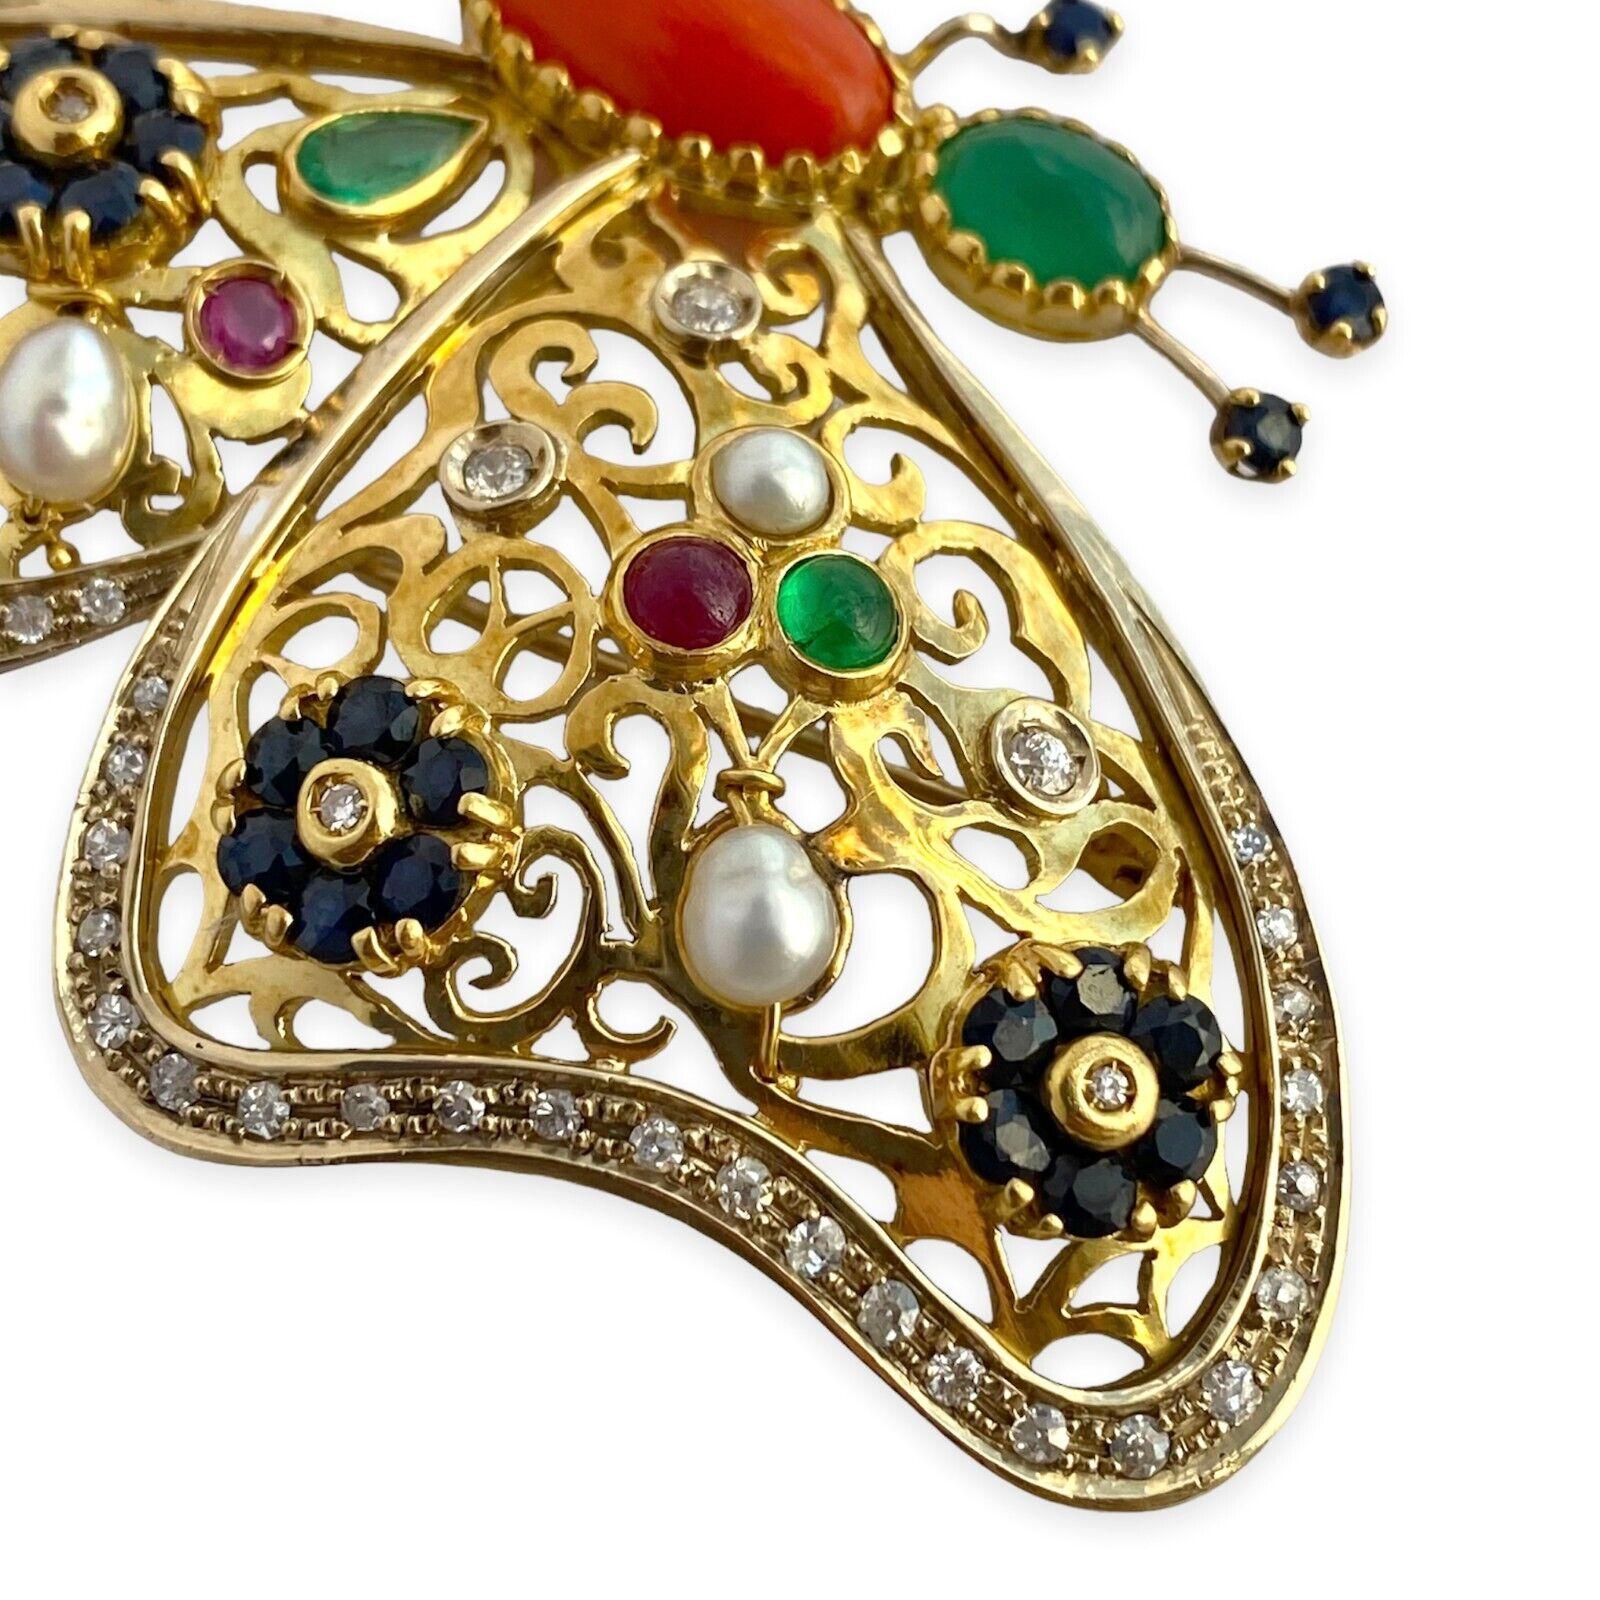 Mixed Cut Antique 18k Gold Butterfly Brooch with Gemstones: Sapphire Diamonds Emerald For Sale